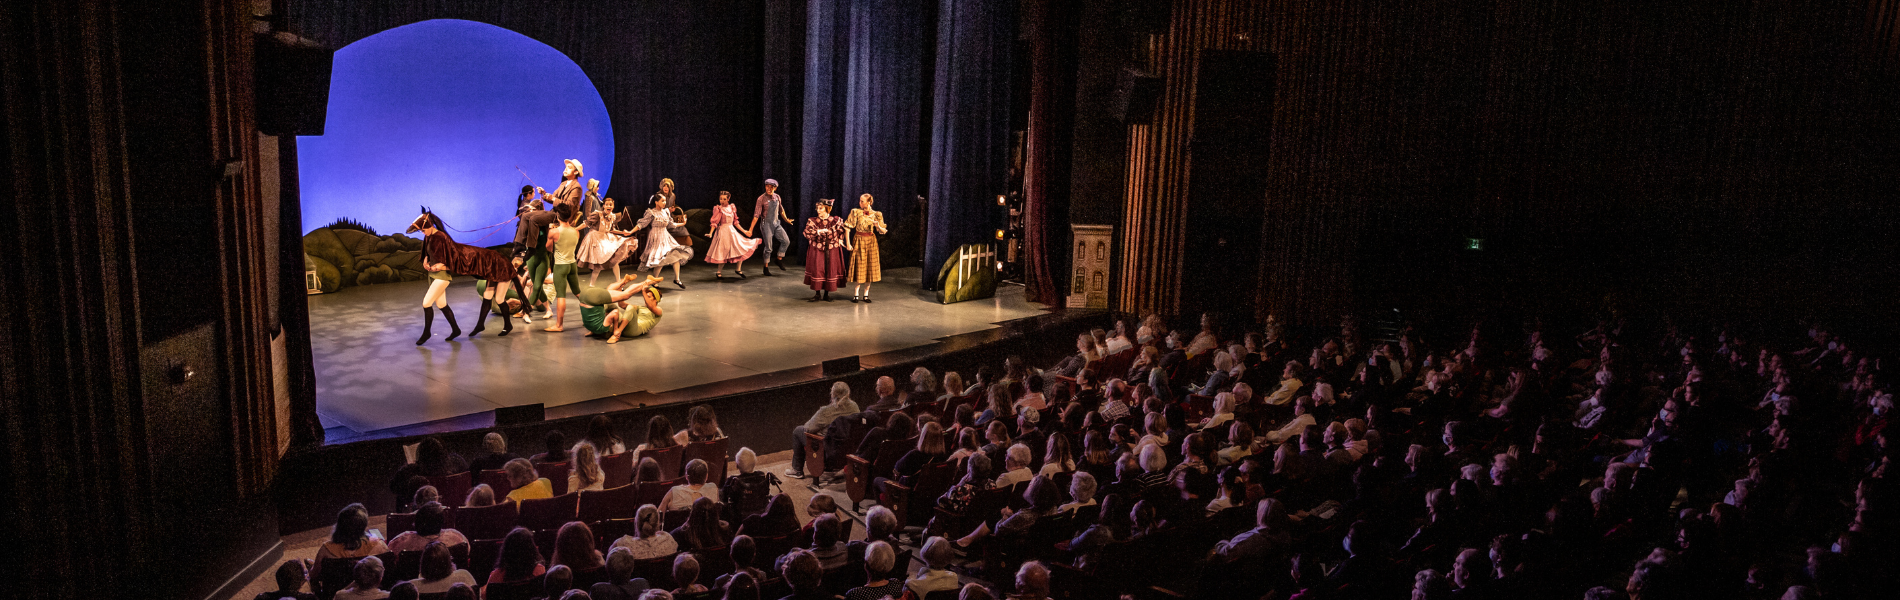 A full audience watching a dance production on the Playhouse stage